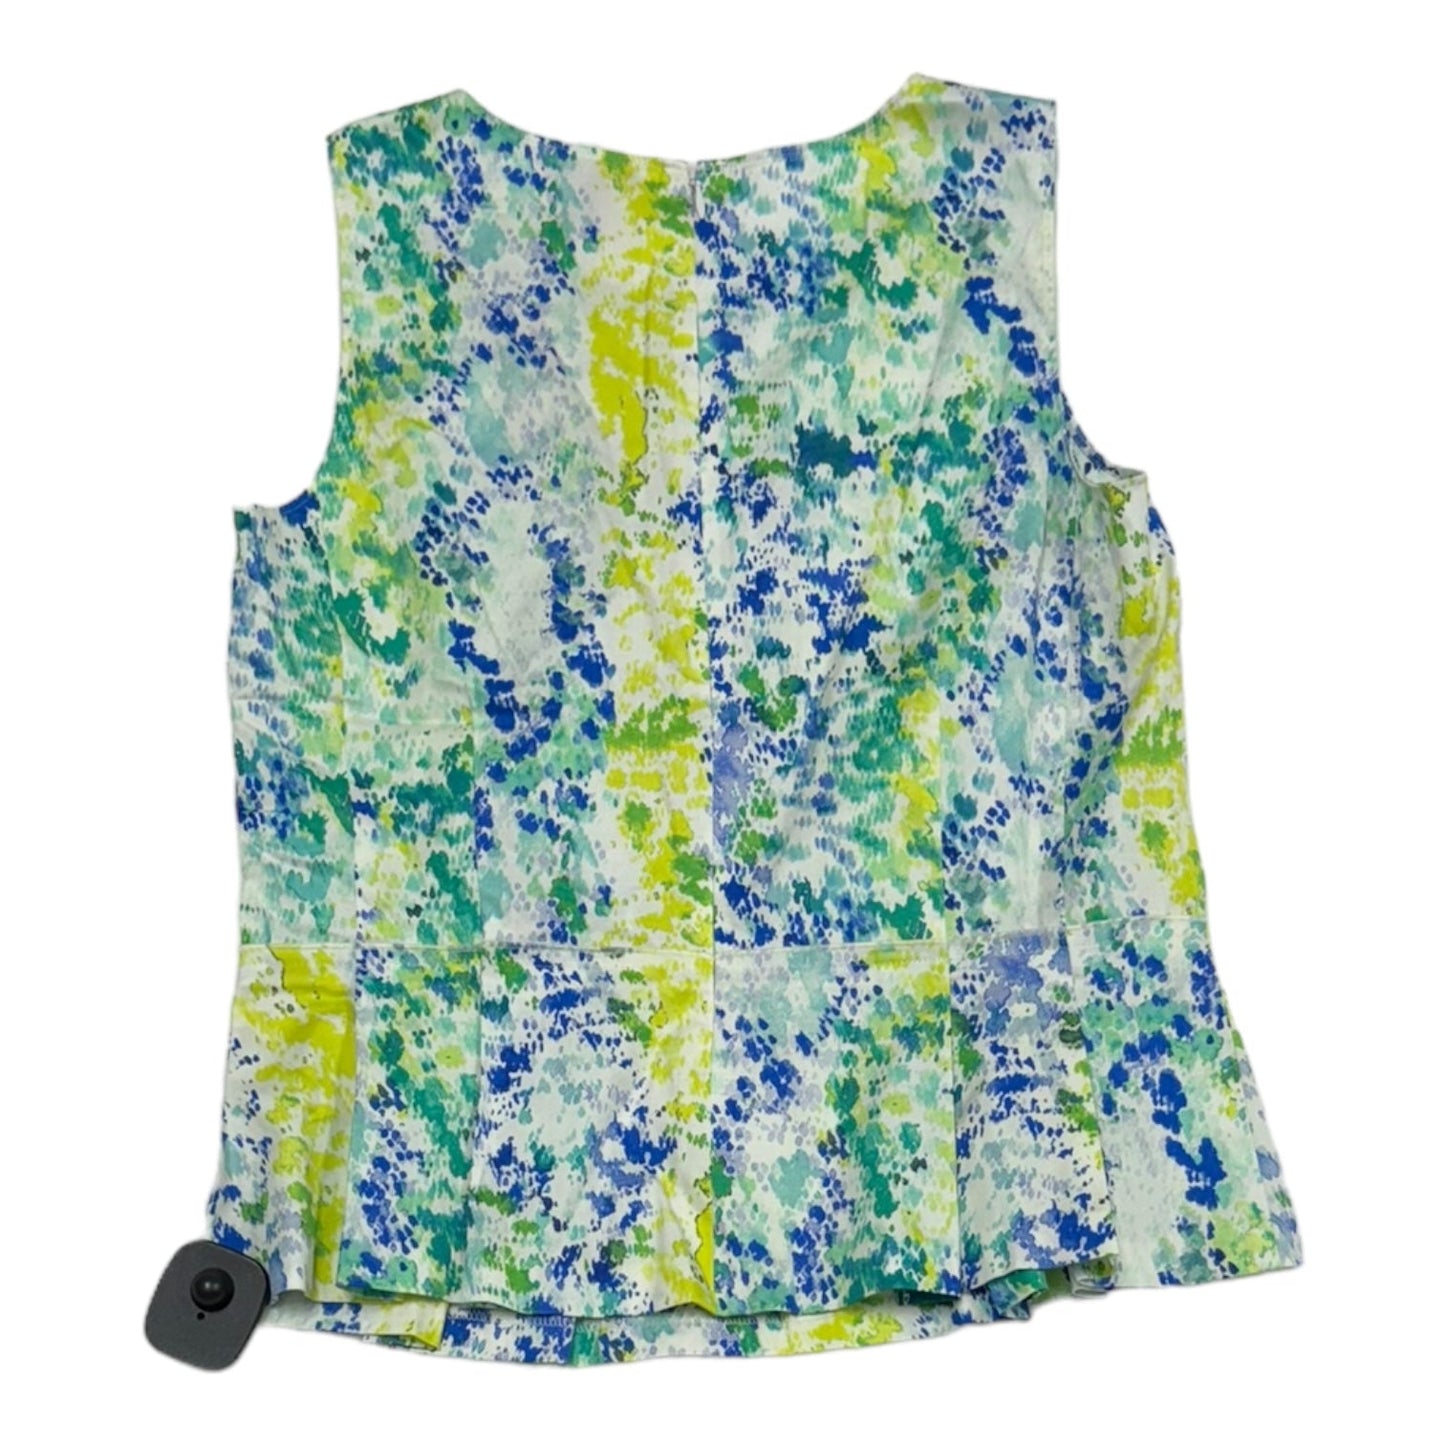 Top Sleeveless By Ann Taylor  Size: 2